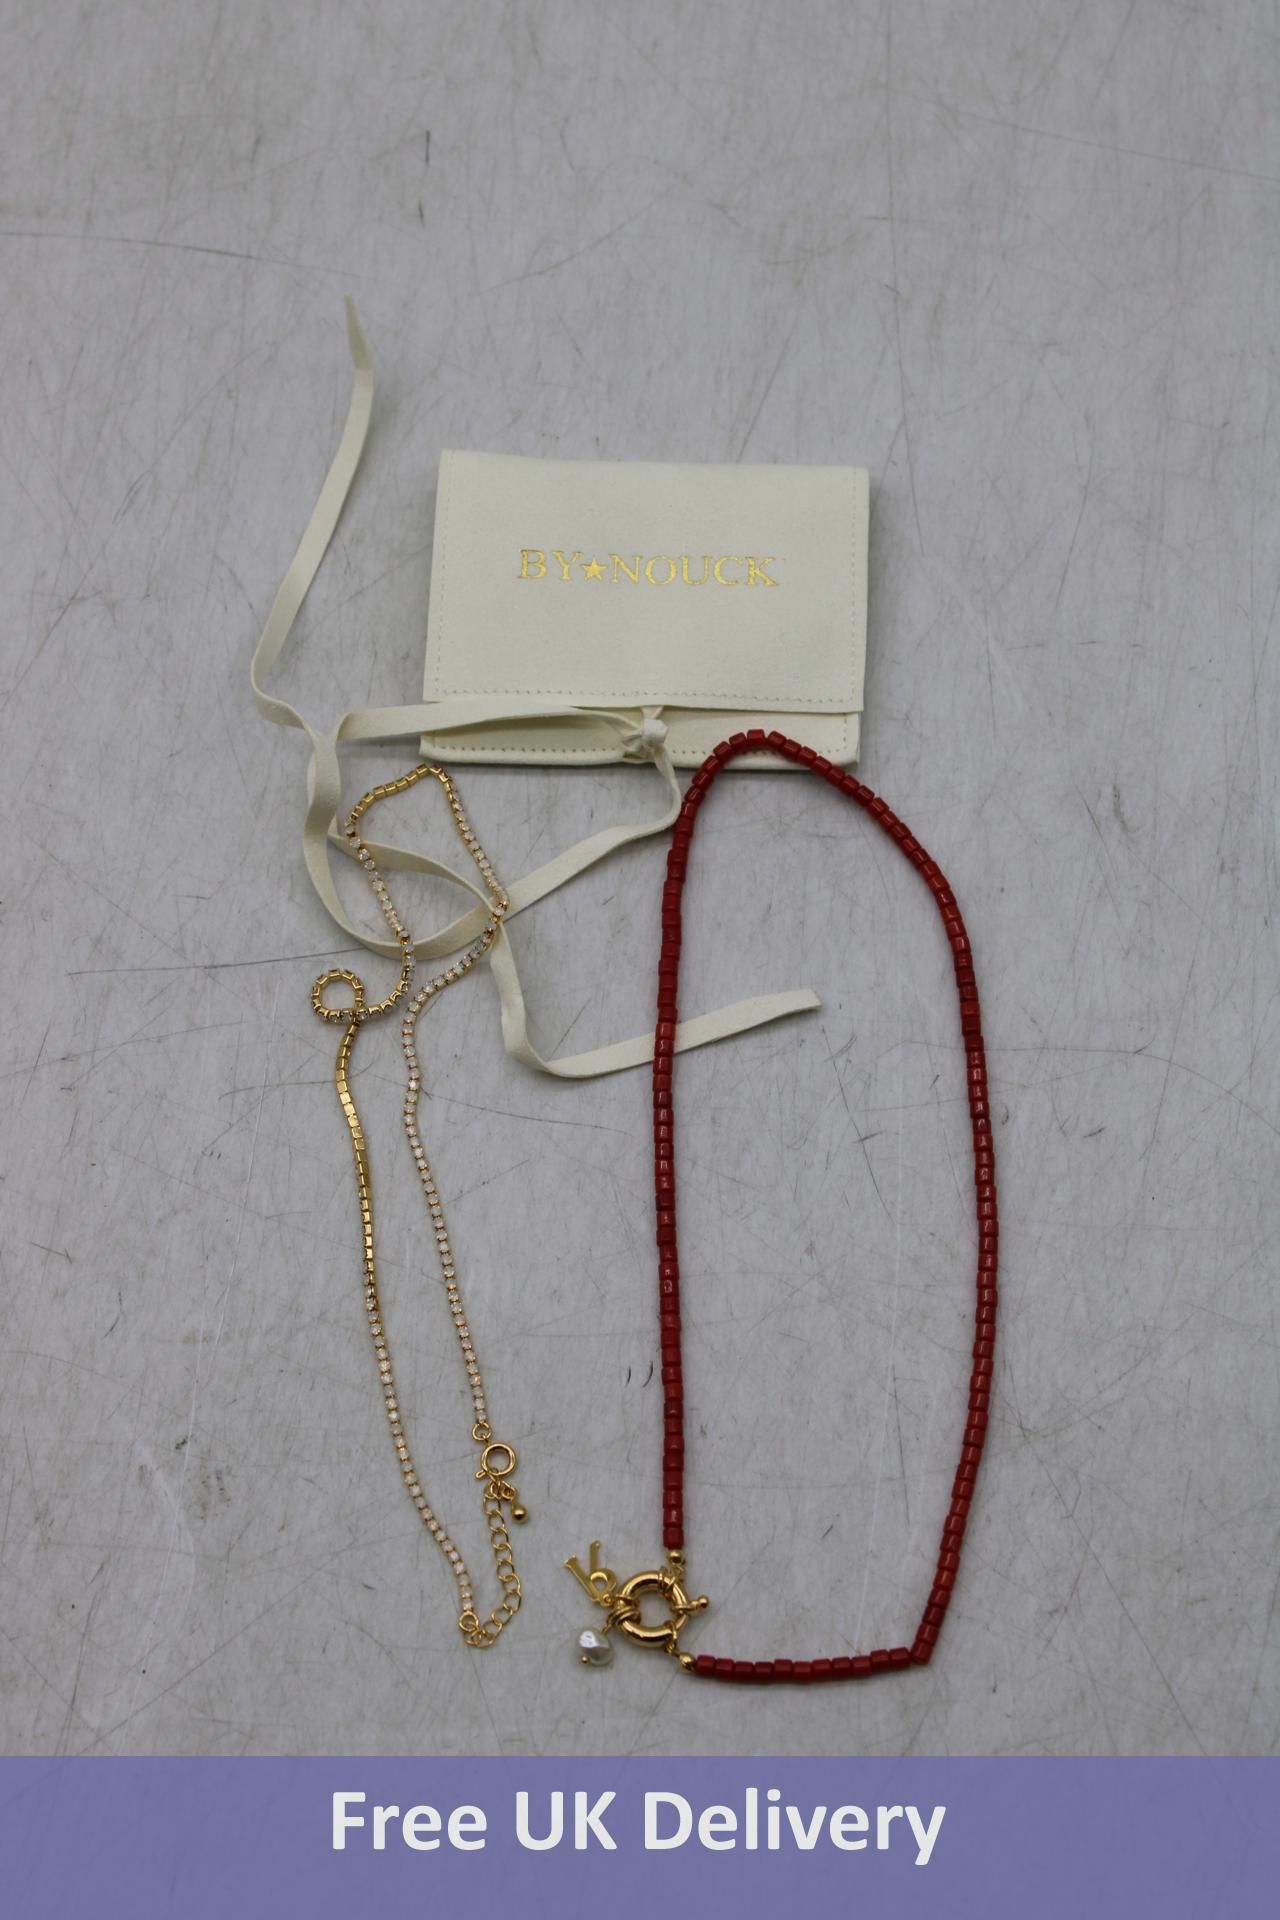 Two Pieces of By Nouck Jewellery to include 1x Milky Rhinestone Choker, 1x Red Cube Necklace with 'R